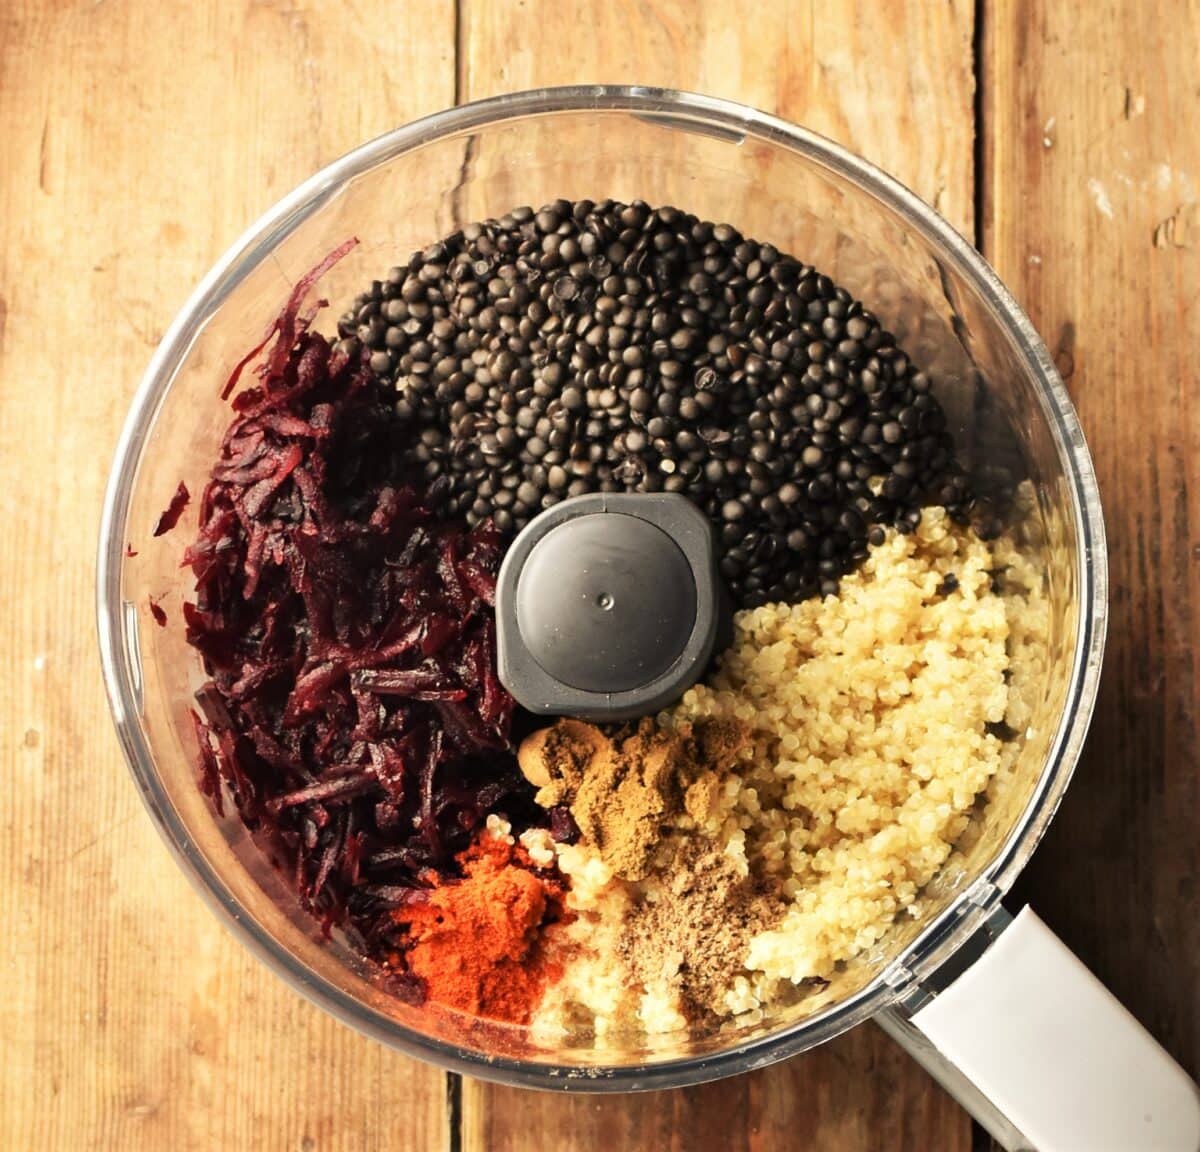 Grated beetroot, quinoa, lentils and spices in blender.